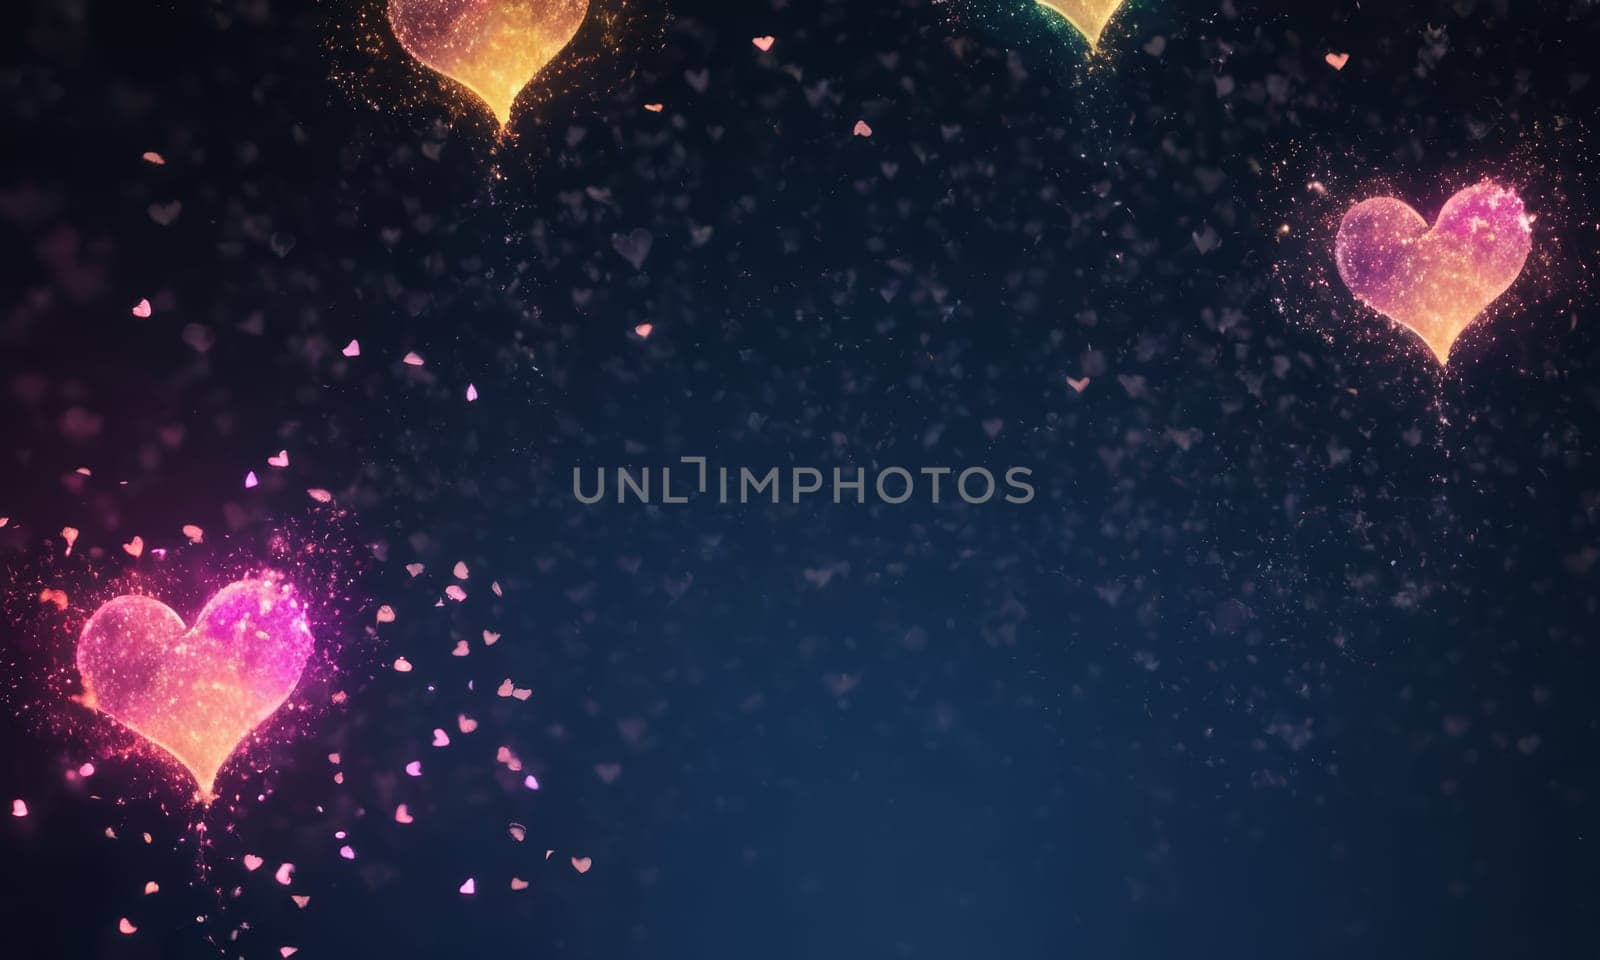 A captivating image showcasing a sparkling heart amidst a magical atmosphere. The glistening particles create an enchanting scene of love and romance. Ideal for Valentines Day or romantic occasions.